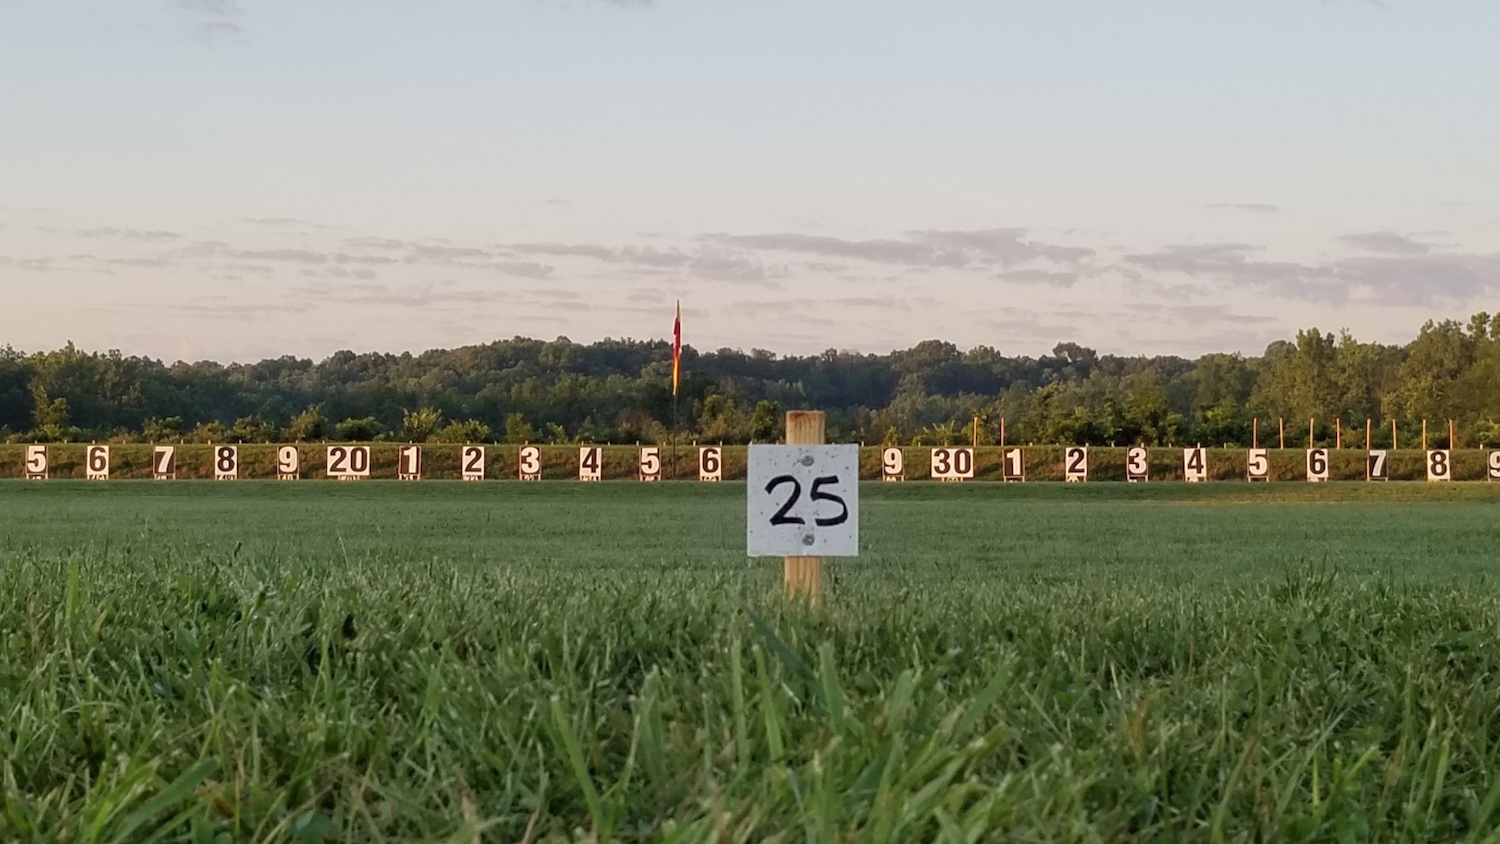 Shooting Sports Traditions Live On at Camp Atterbury During NRA High Power Rifle Championships